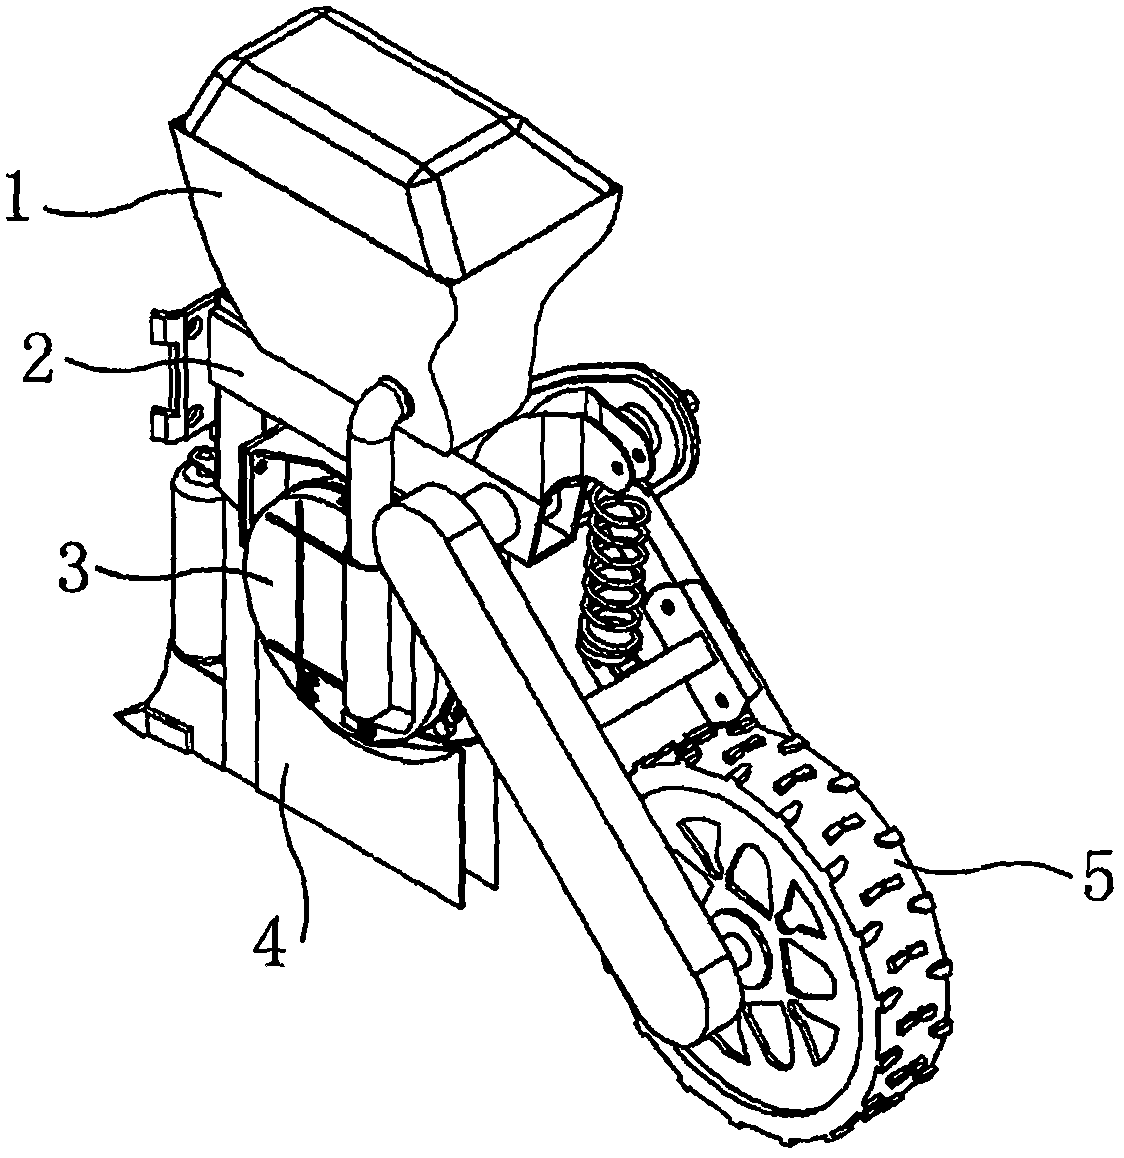 Seed metering device capable of conveying seeds forward